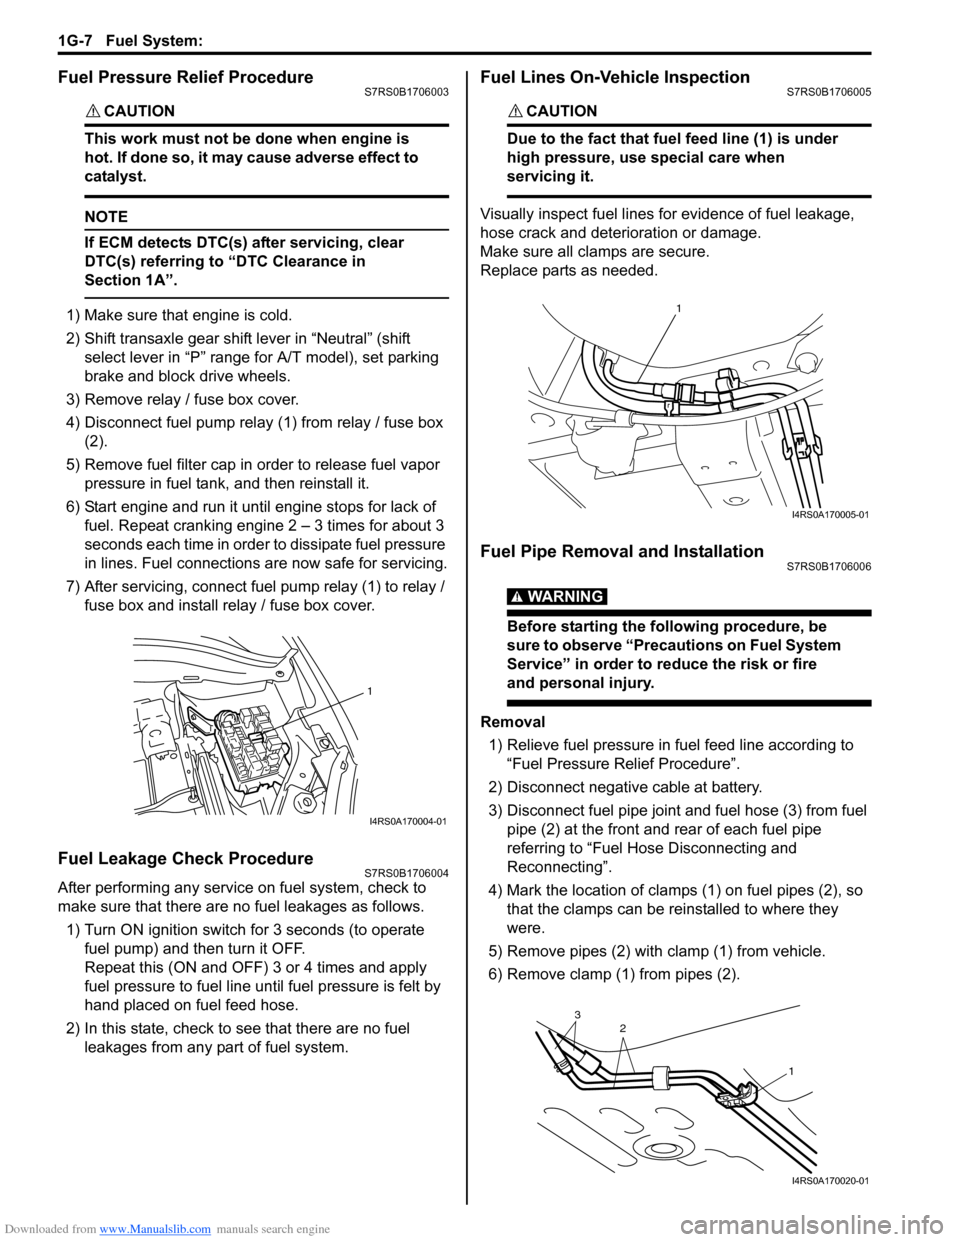 SUZUKI SWIFT 2005 2.G Service Service Manual Downloaded from www.Manualslib.com manuals search engine 1G-7 Fuel System: 
Fuel Pressure Relief ProcedureS7RS0B1706003
CAUTION! 
This work must not be done when engine is 
hot. If done so, it may cau